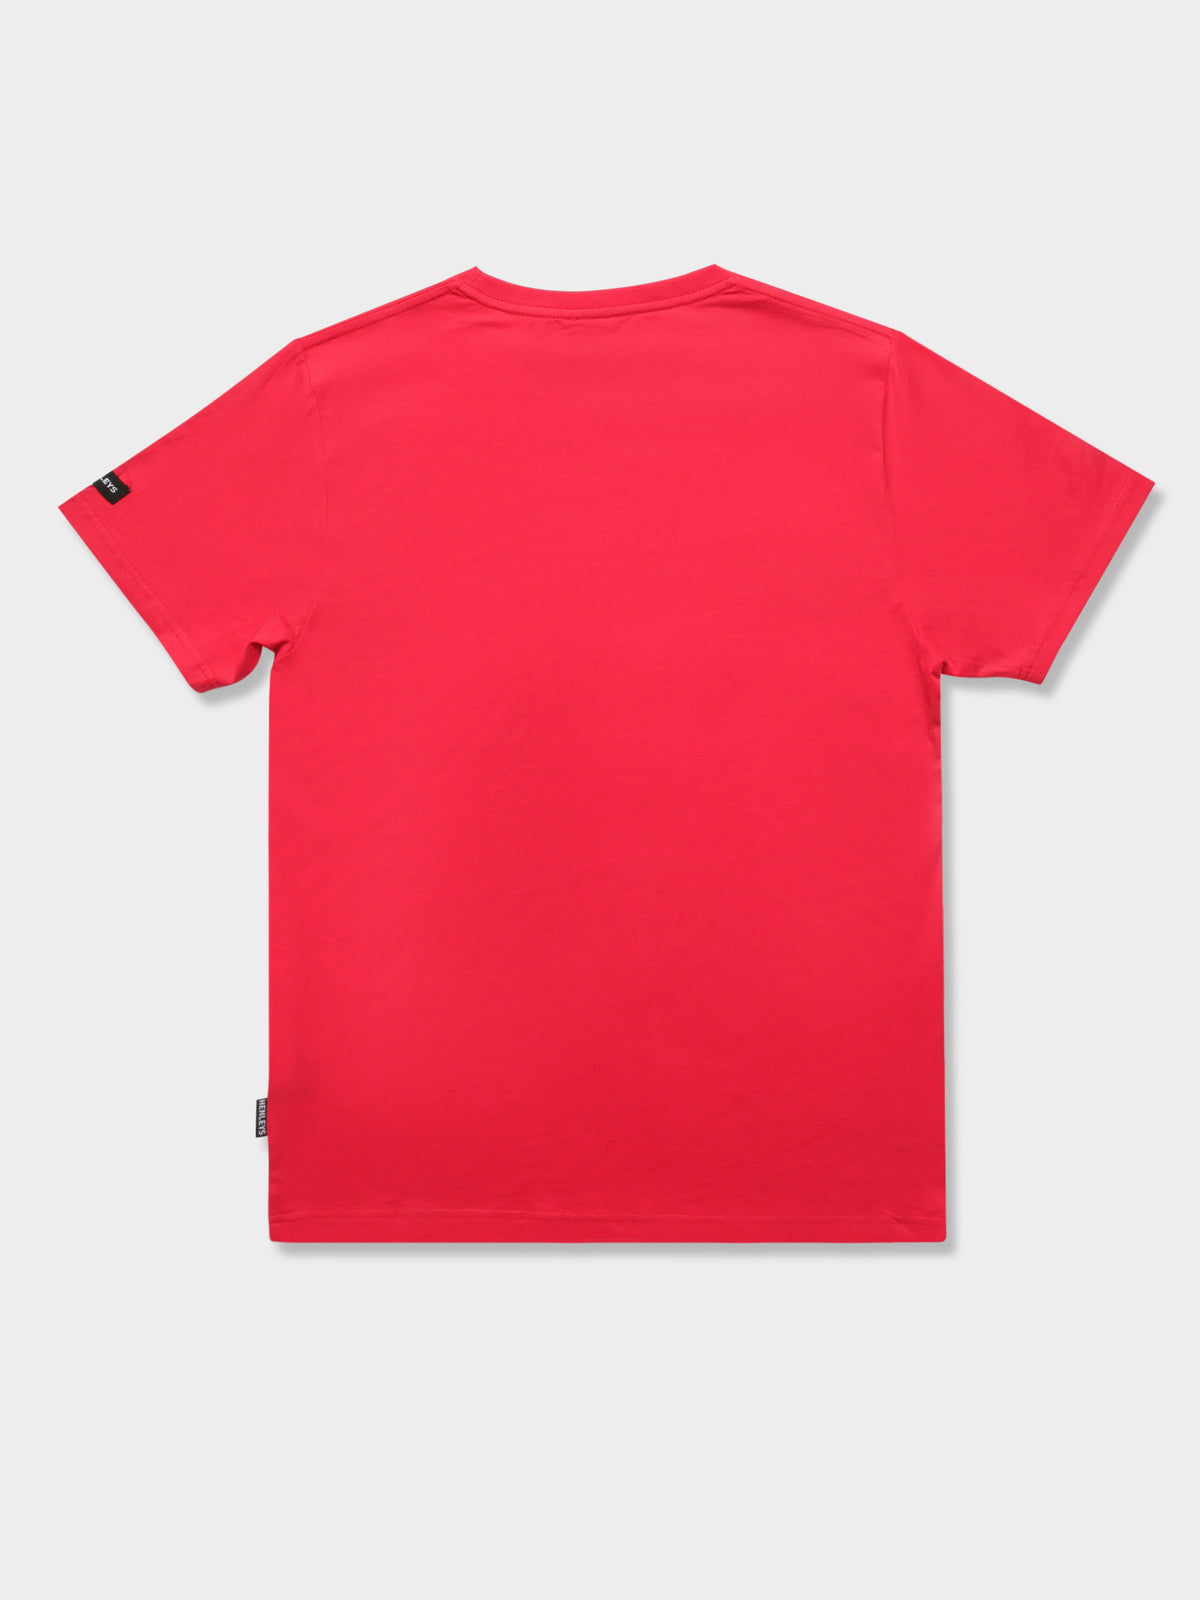 Jenkins T-Shirt in Fire Red